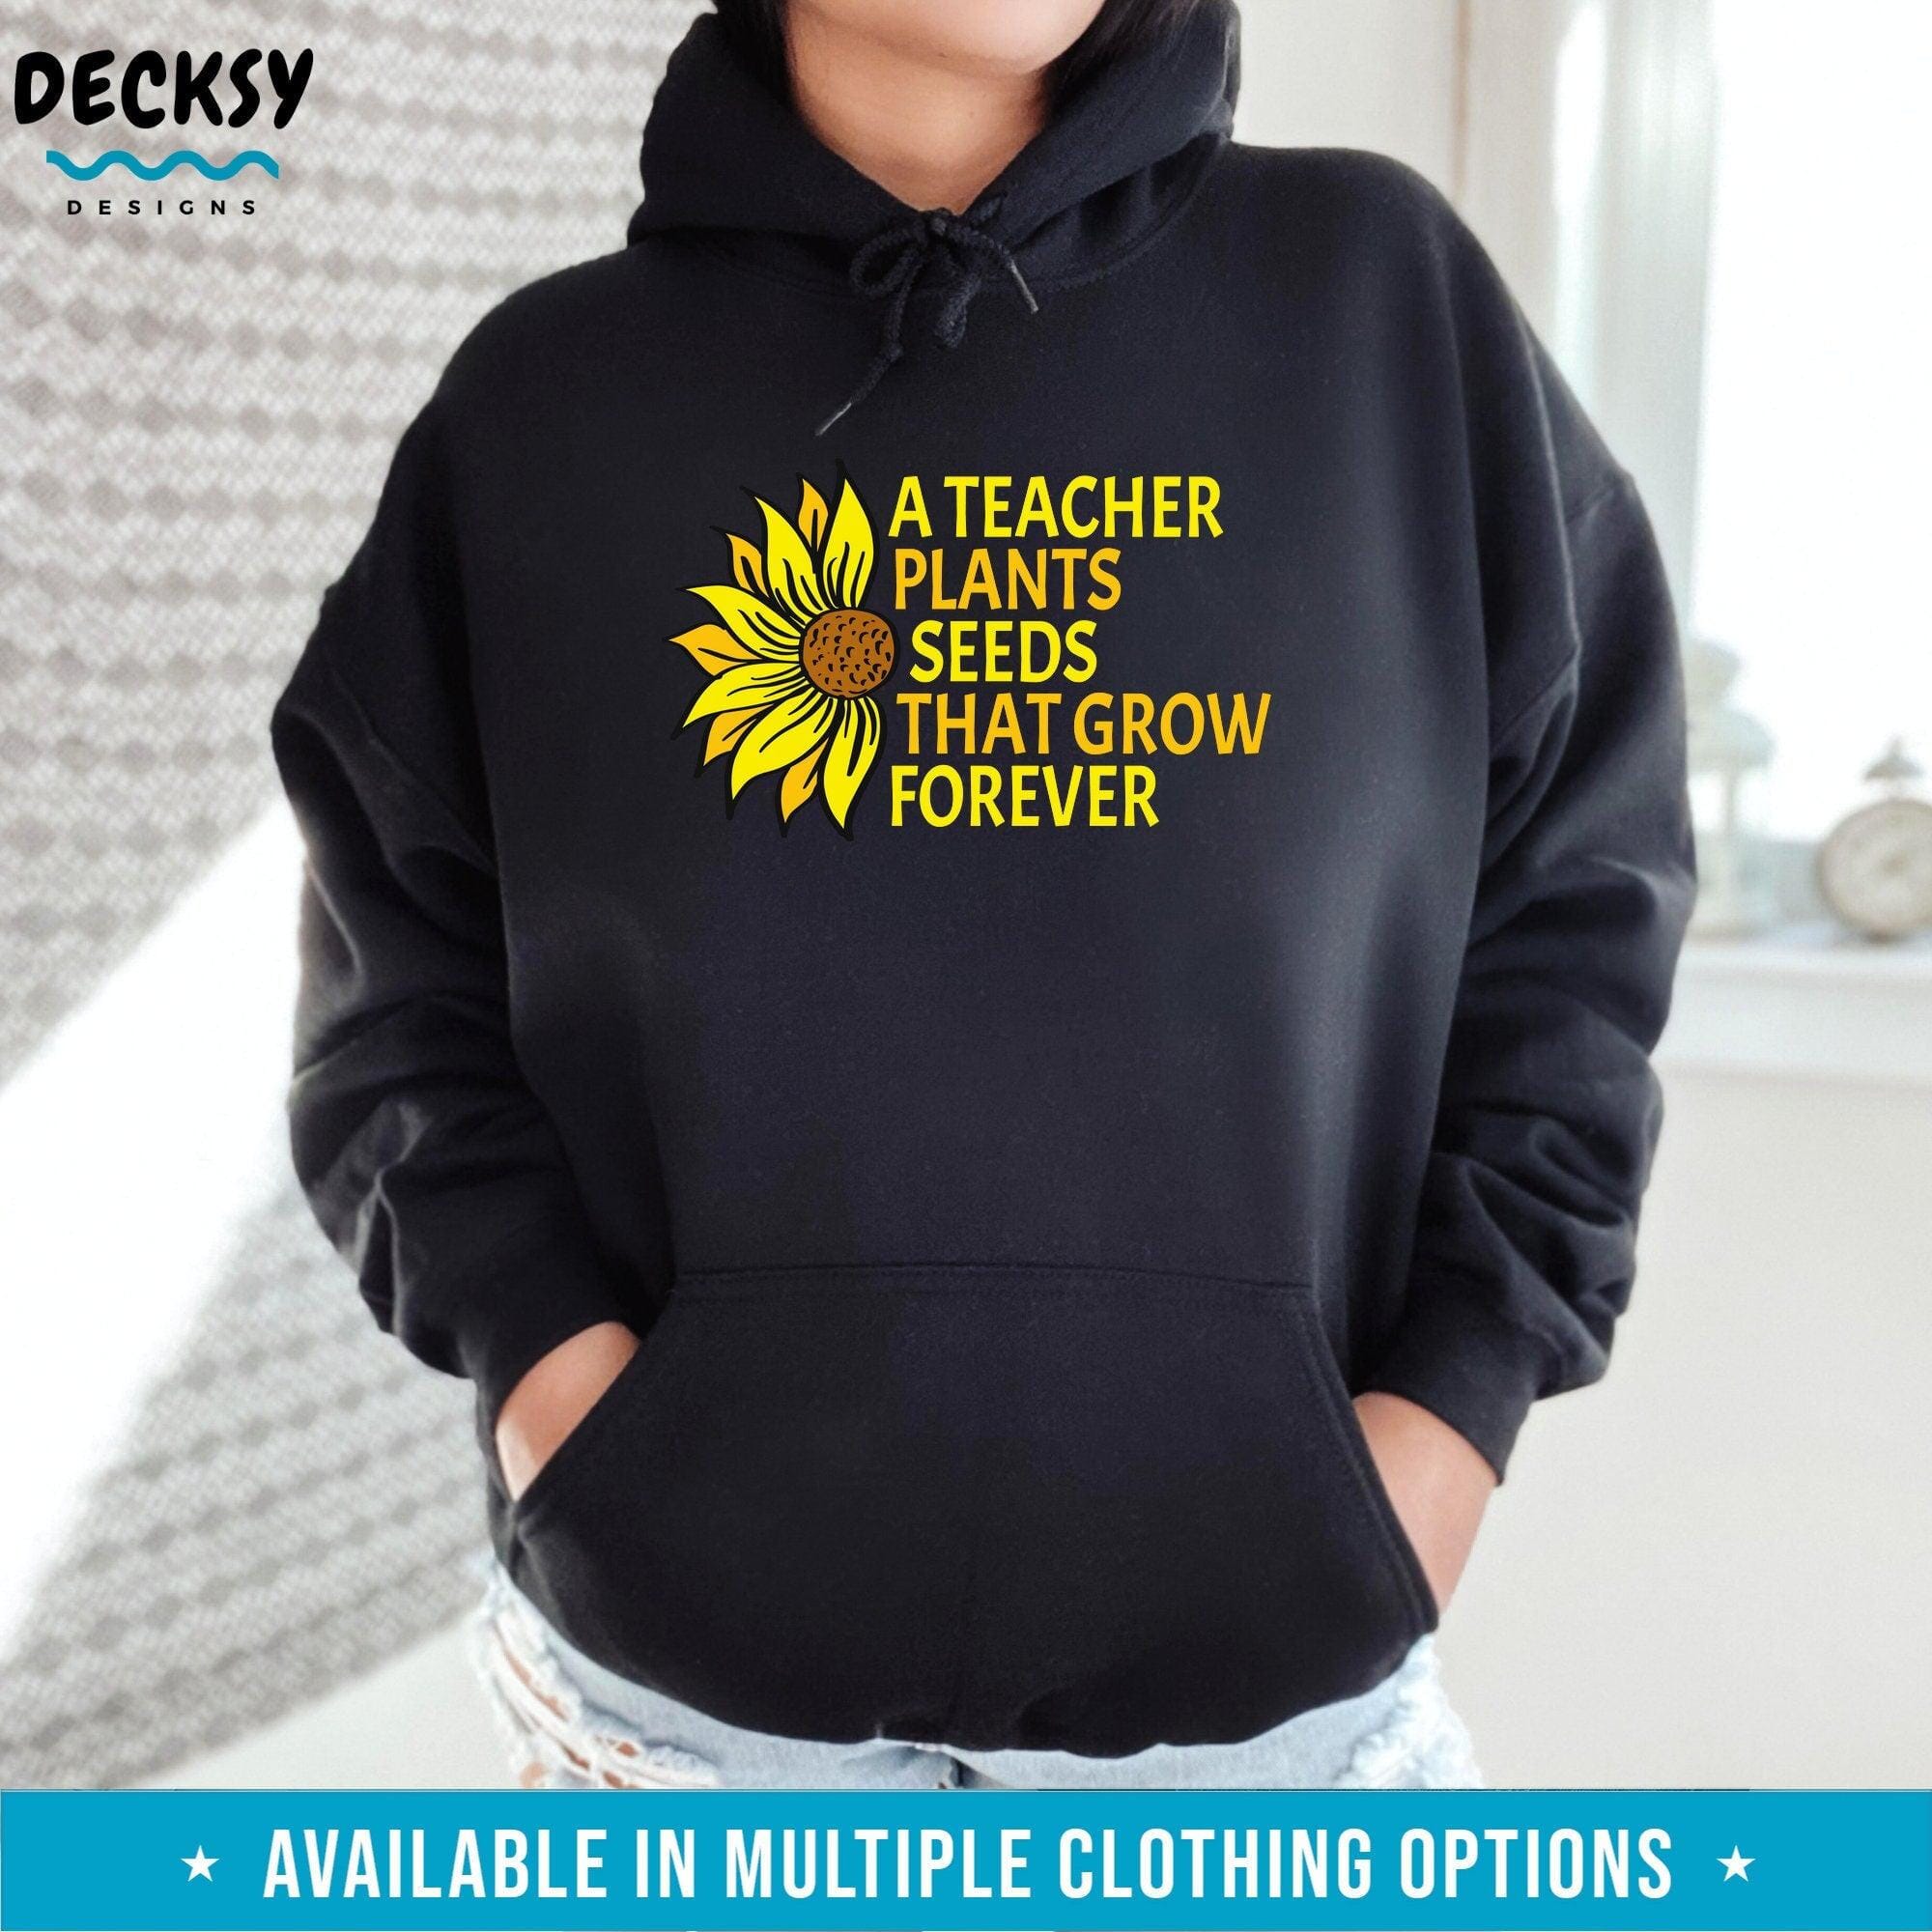 Teacher Shirt, Gift For Teaching Assistant-Clothing:Gender-Neutral Adult Clothing:Tops & Tees:T-shirts:Graphic Tees-DecksyDesigns